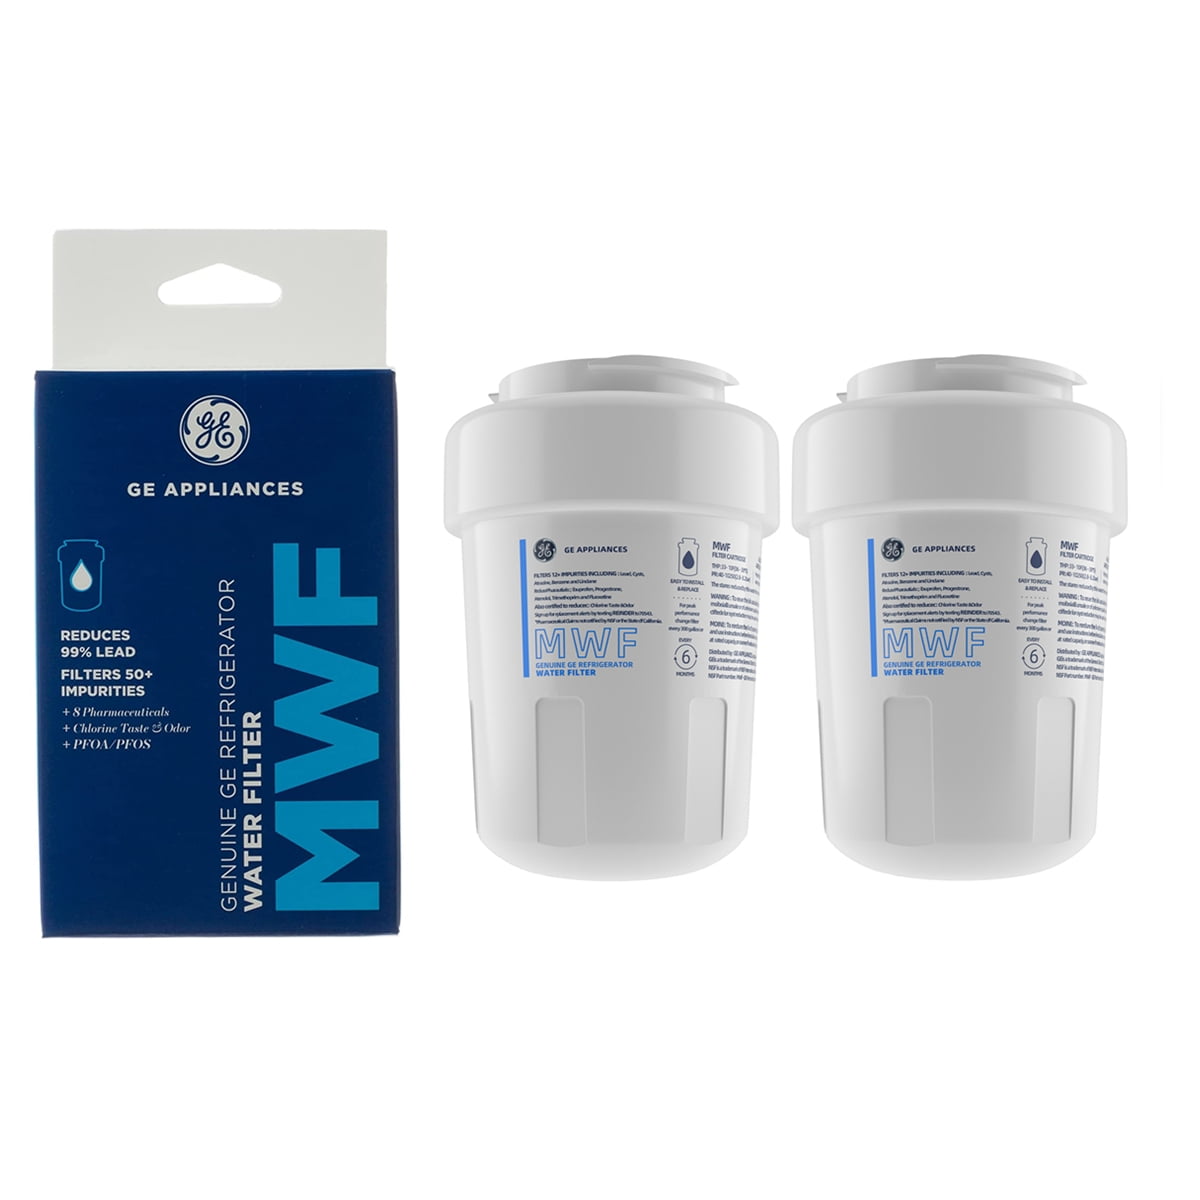 HDX FMG-1 Kenmore 469991 Refrigerator Cartridge Waterdrop Plus MWF Refrigerator Water Filter Replacement for GE® MWF PL-100 2 Filters MWFP 197D6321P006 PC75009 MWFA RWF1060 RWF0600A WFC1201 